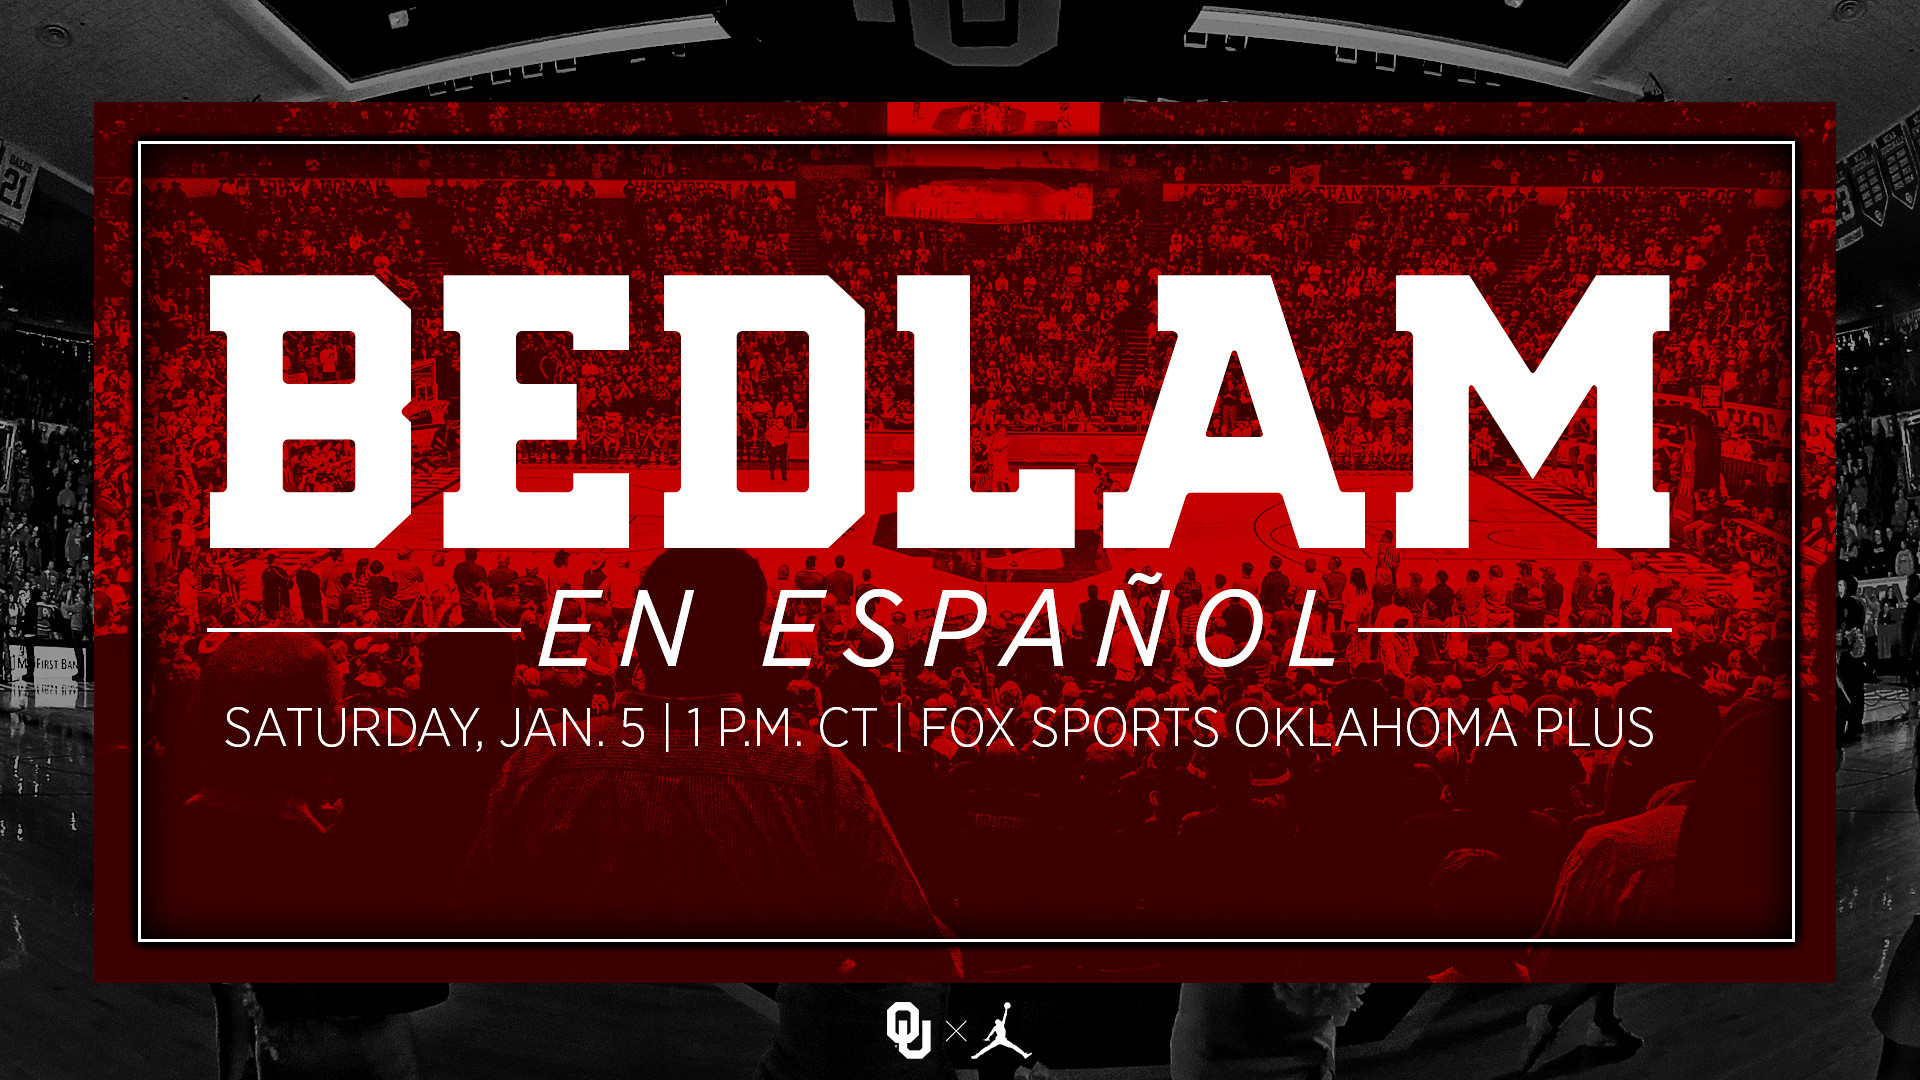 1920x1080 OU to Produce Spanish-Language Bedlam Broadcast - The Official Site of  Oklahoma Sooner Sports